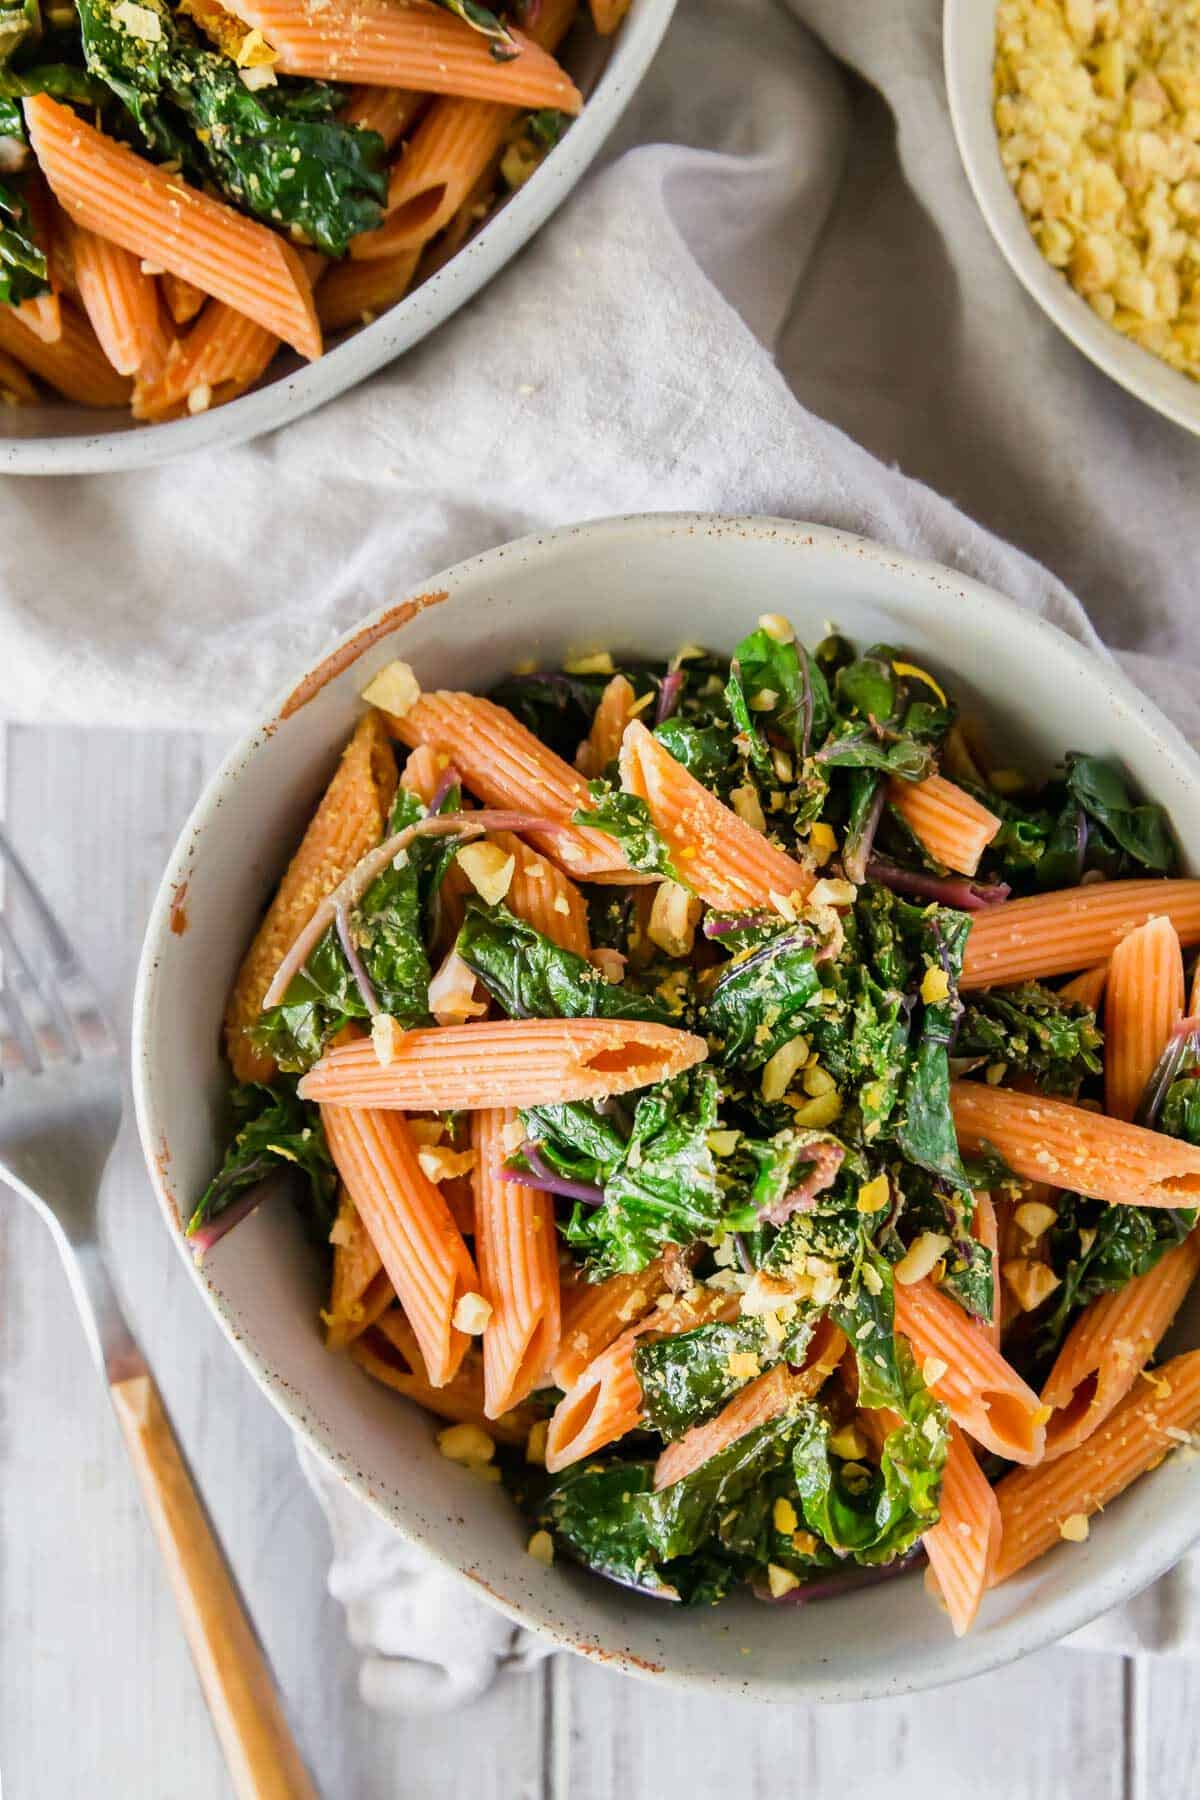 Enjoy this gluten-free red lentil pasta recipe with garlickly lemon kale and a vegan walnut nutritional yeast topping for an easy and nutritious dinner.